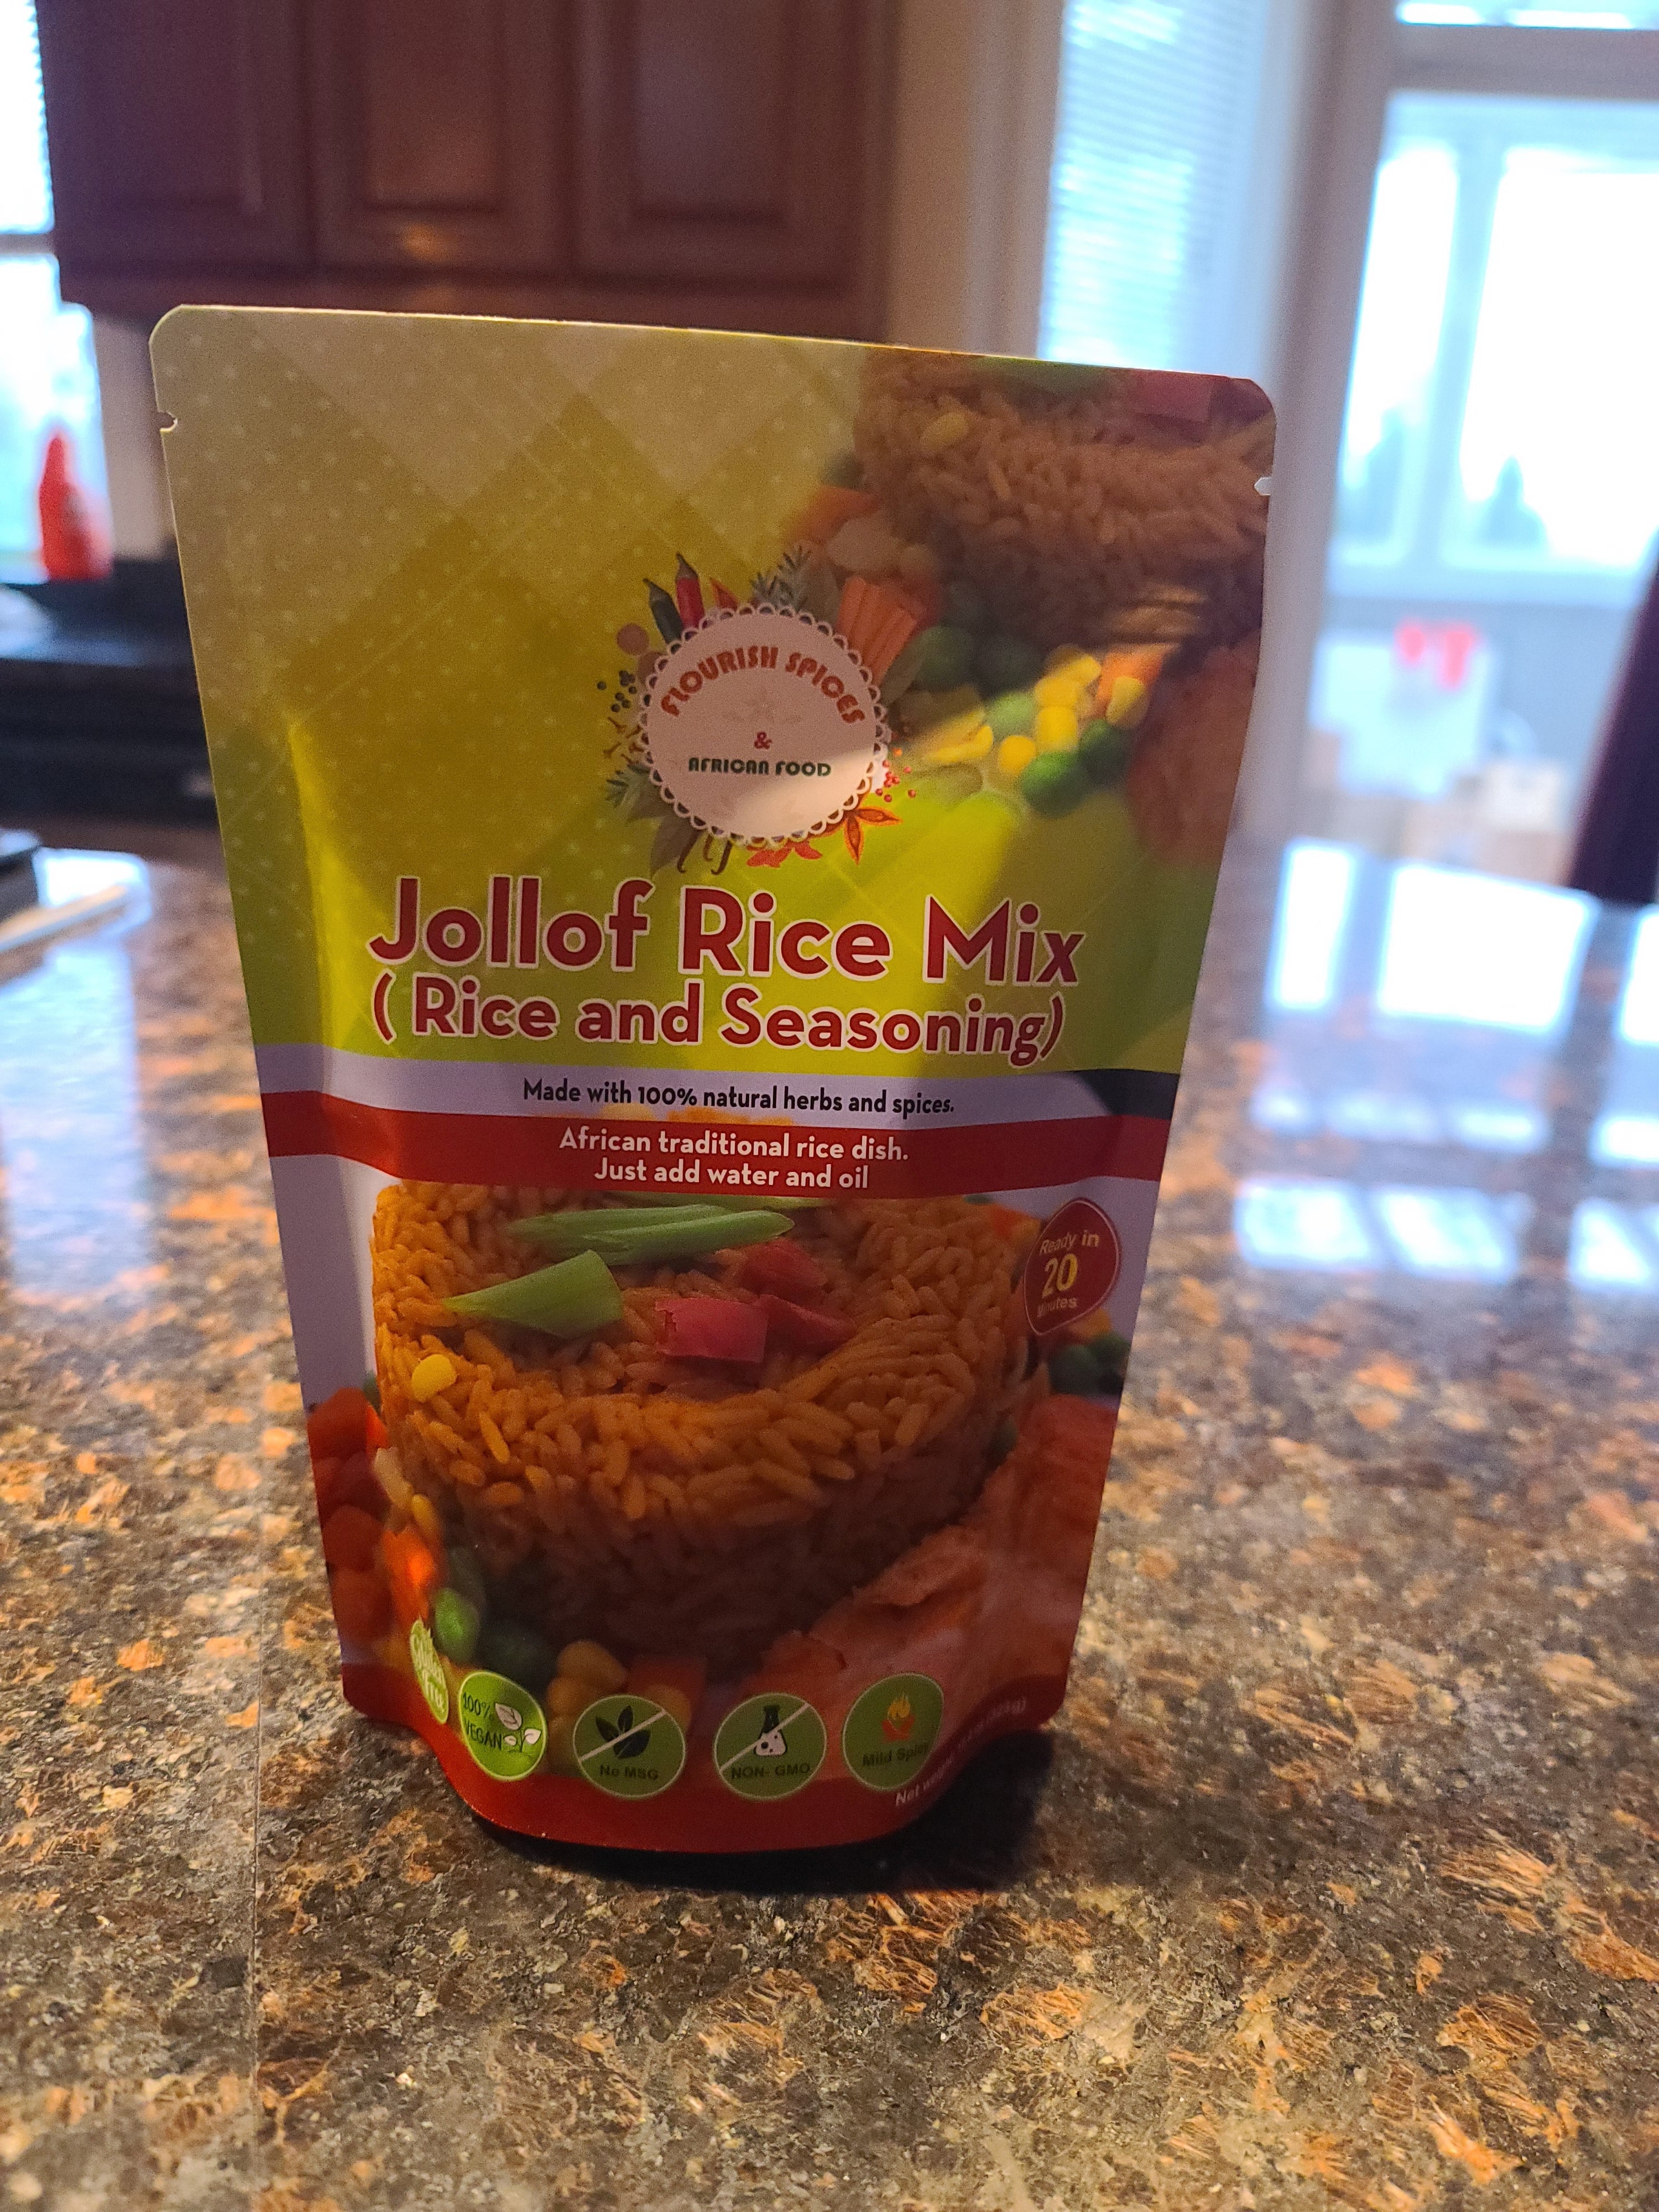 Obiji Fried Rice Seasoning – Flourish Spices And African Food